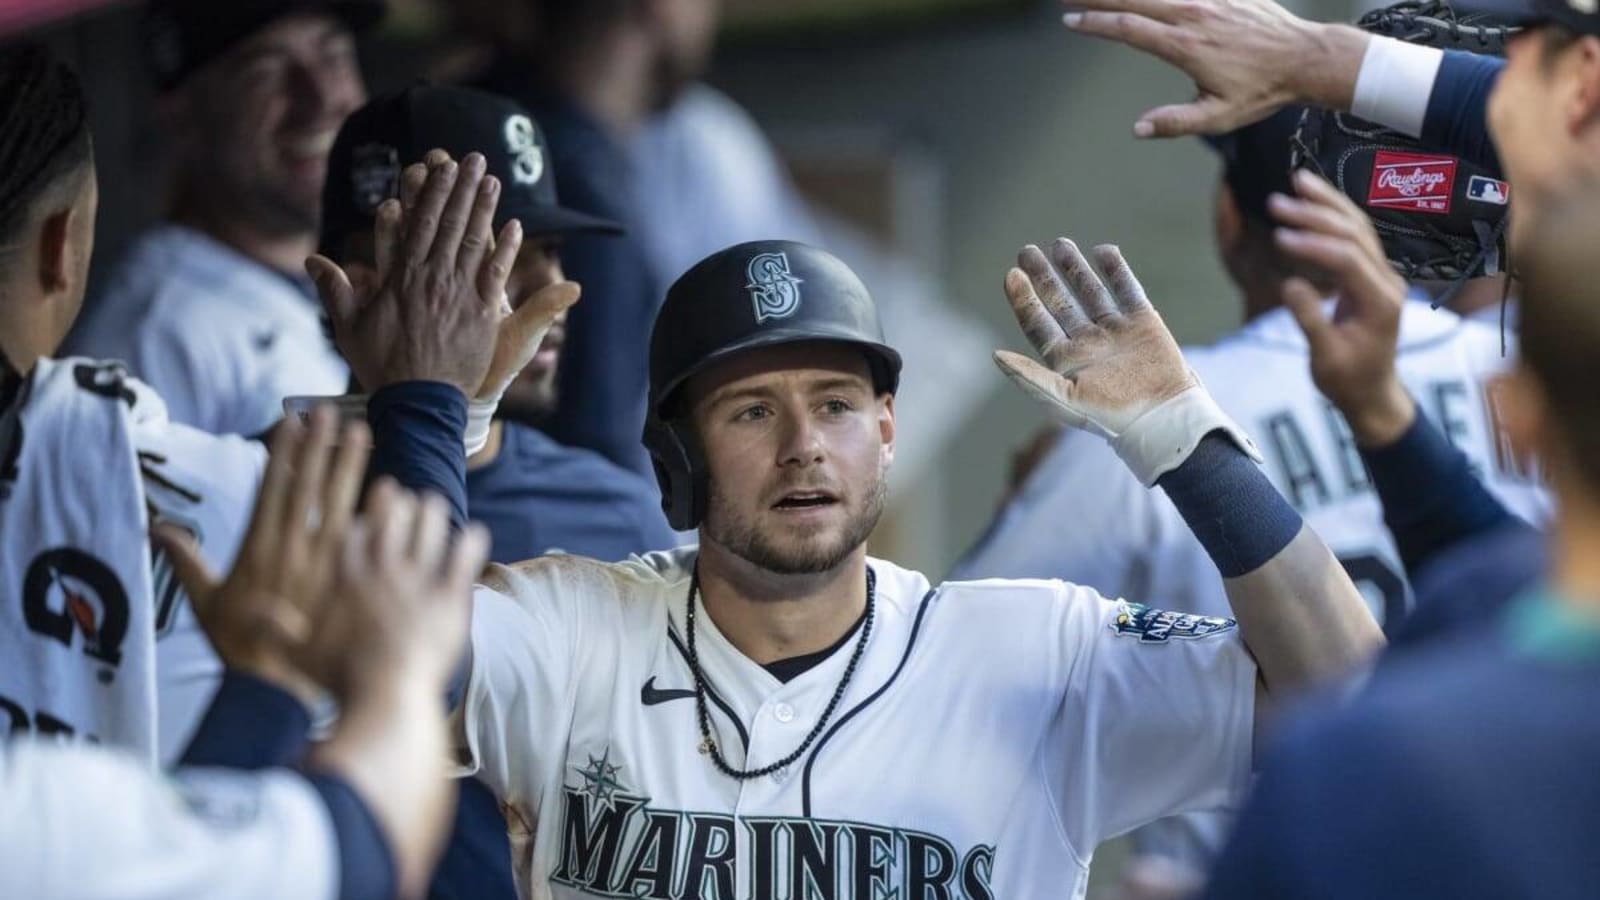 Seattle Mariners Fans Go Viral For Singing 'Country Roads' on Monday Night